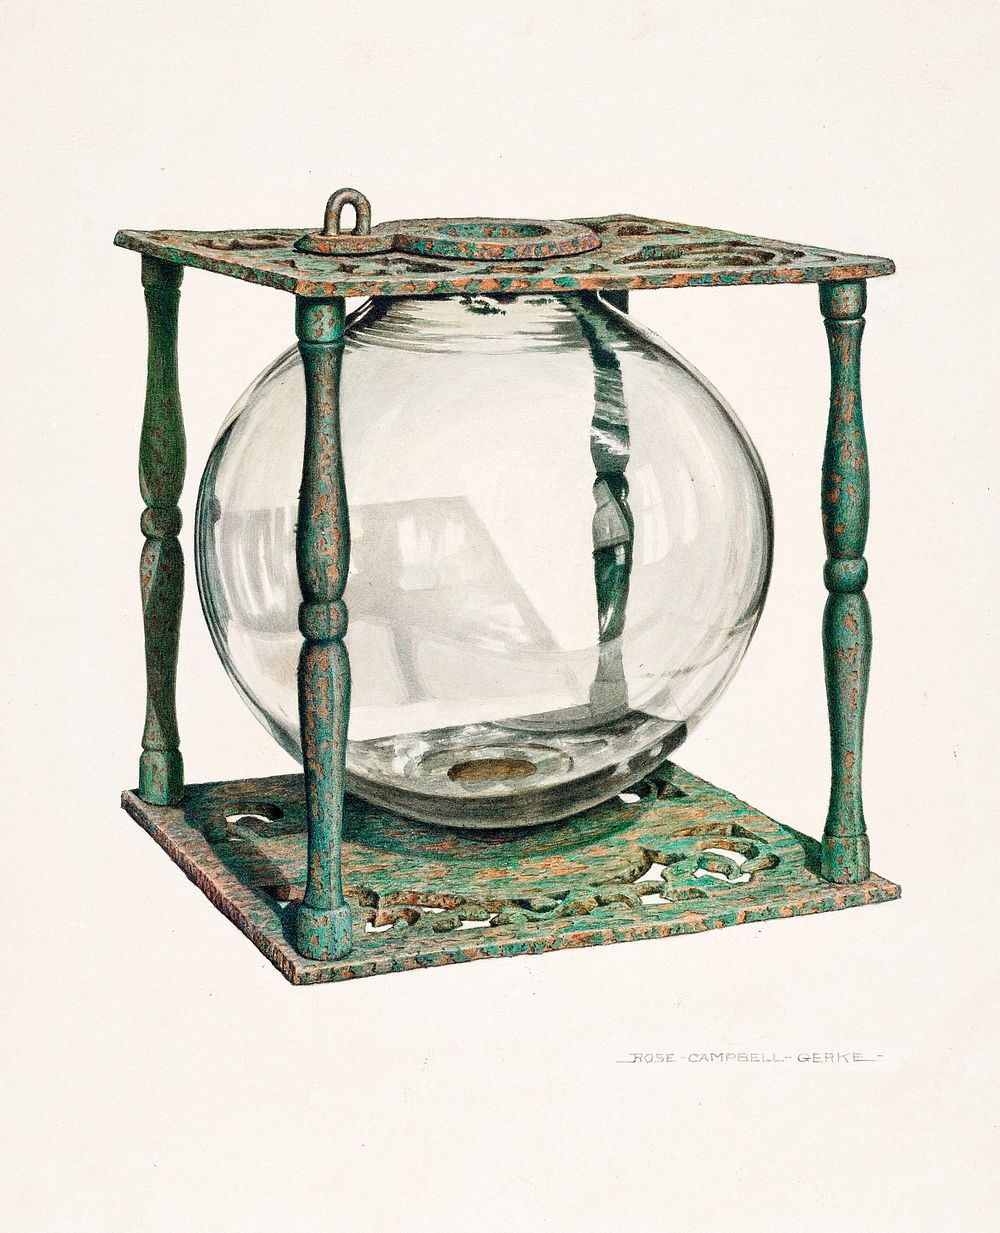 Ballot Box (c. 1939) by Rose Campbell&ndash;Gerke. Original from The National Gallery of Art. Digitally enhanced by rawpixel.